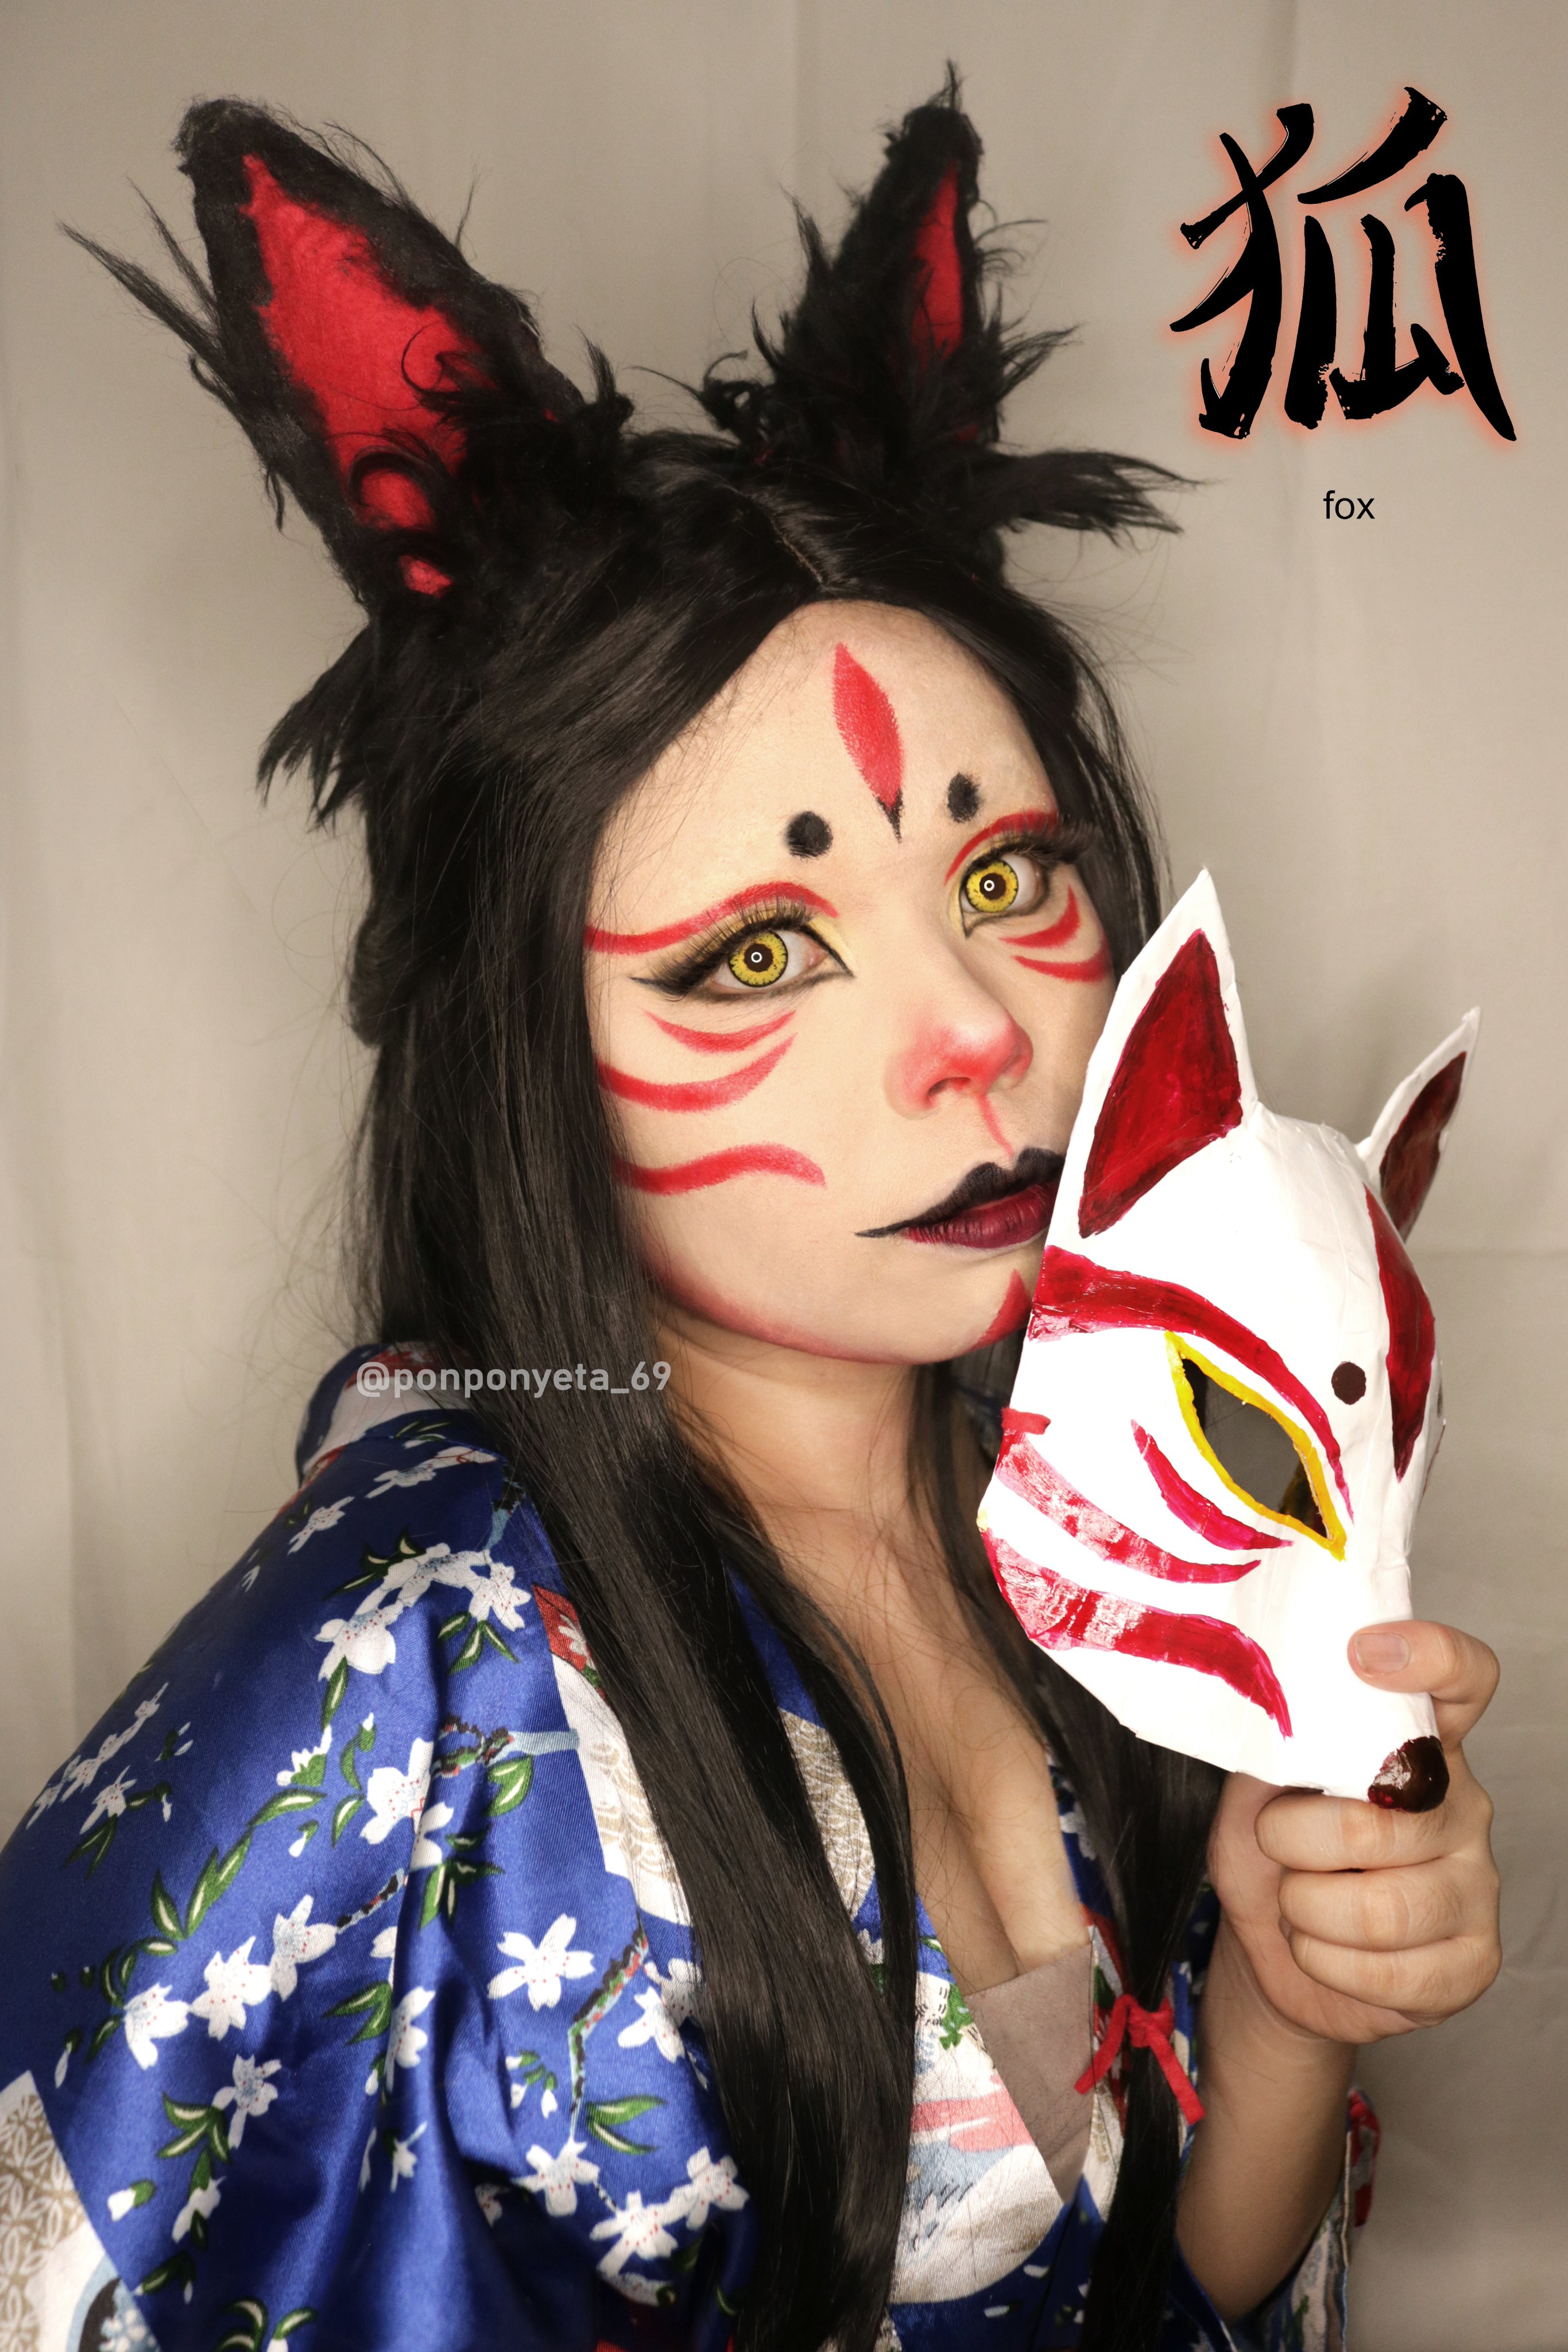 Ponponyeta RESTING on Twitter: "I thought my Sun Goddess will be my number 1 this one takes the spot. my Sumi "The Void" Kitsune makeup &lt;3 will release